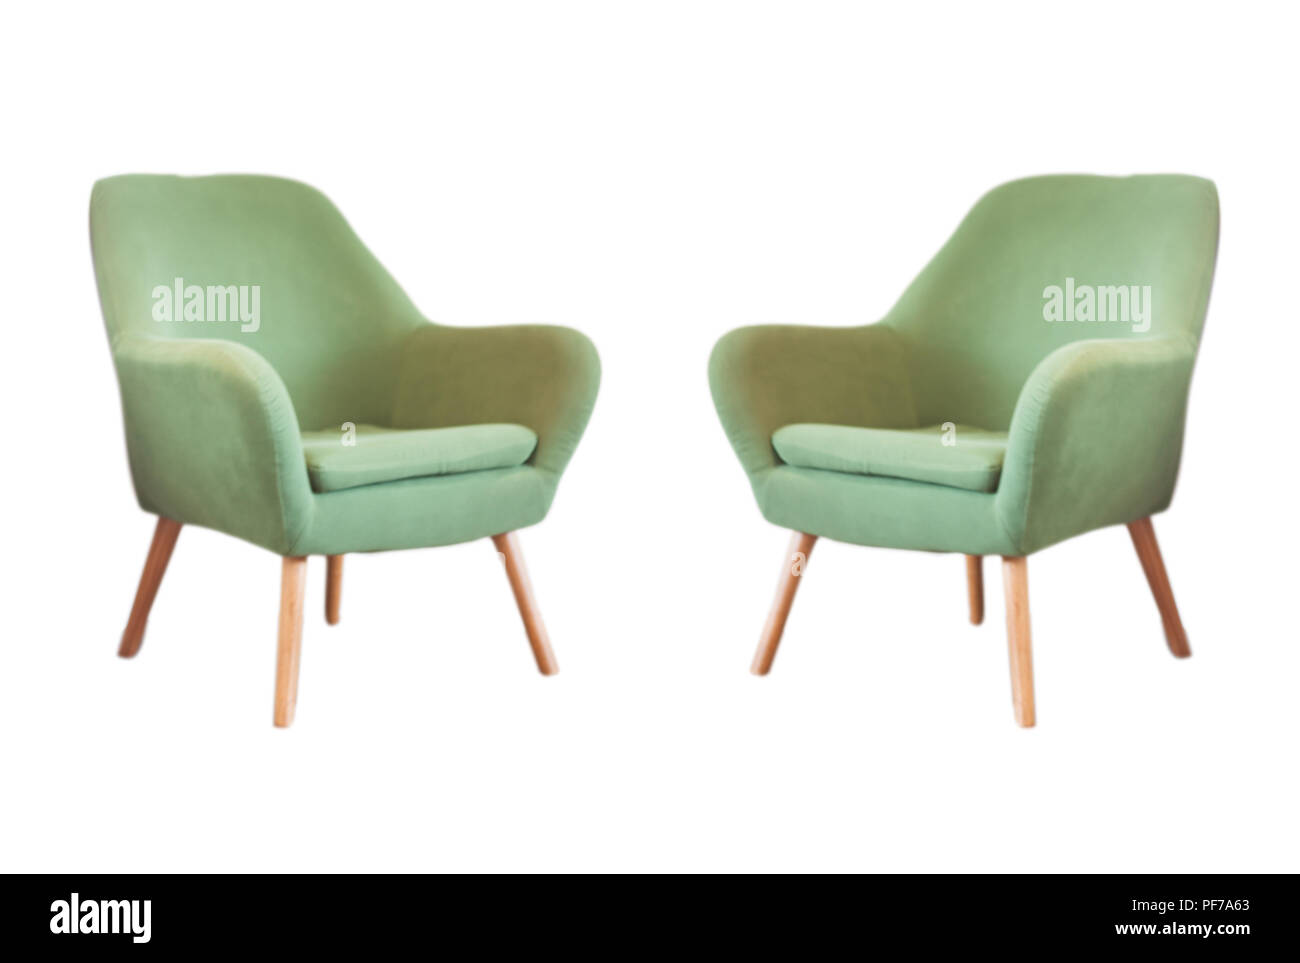 Vintage green chairs isolated on white background with clipping path Stock Photo